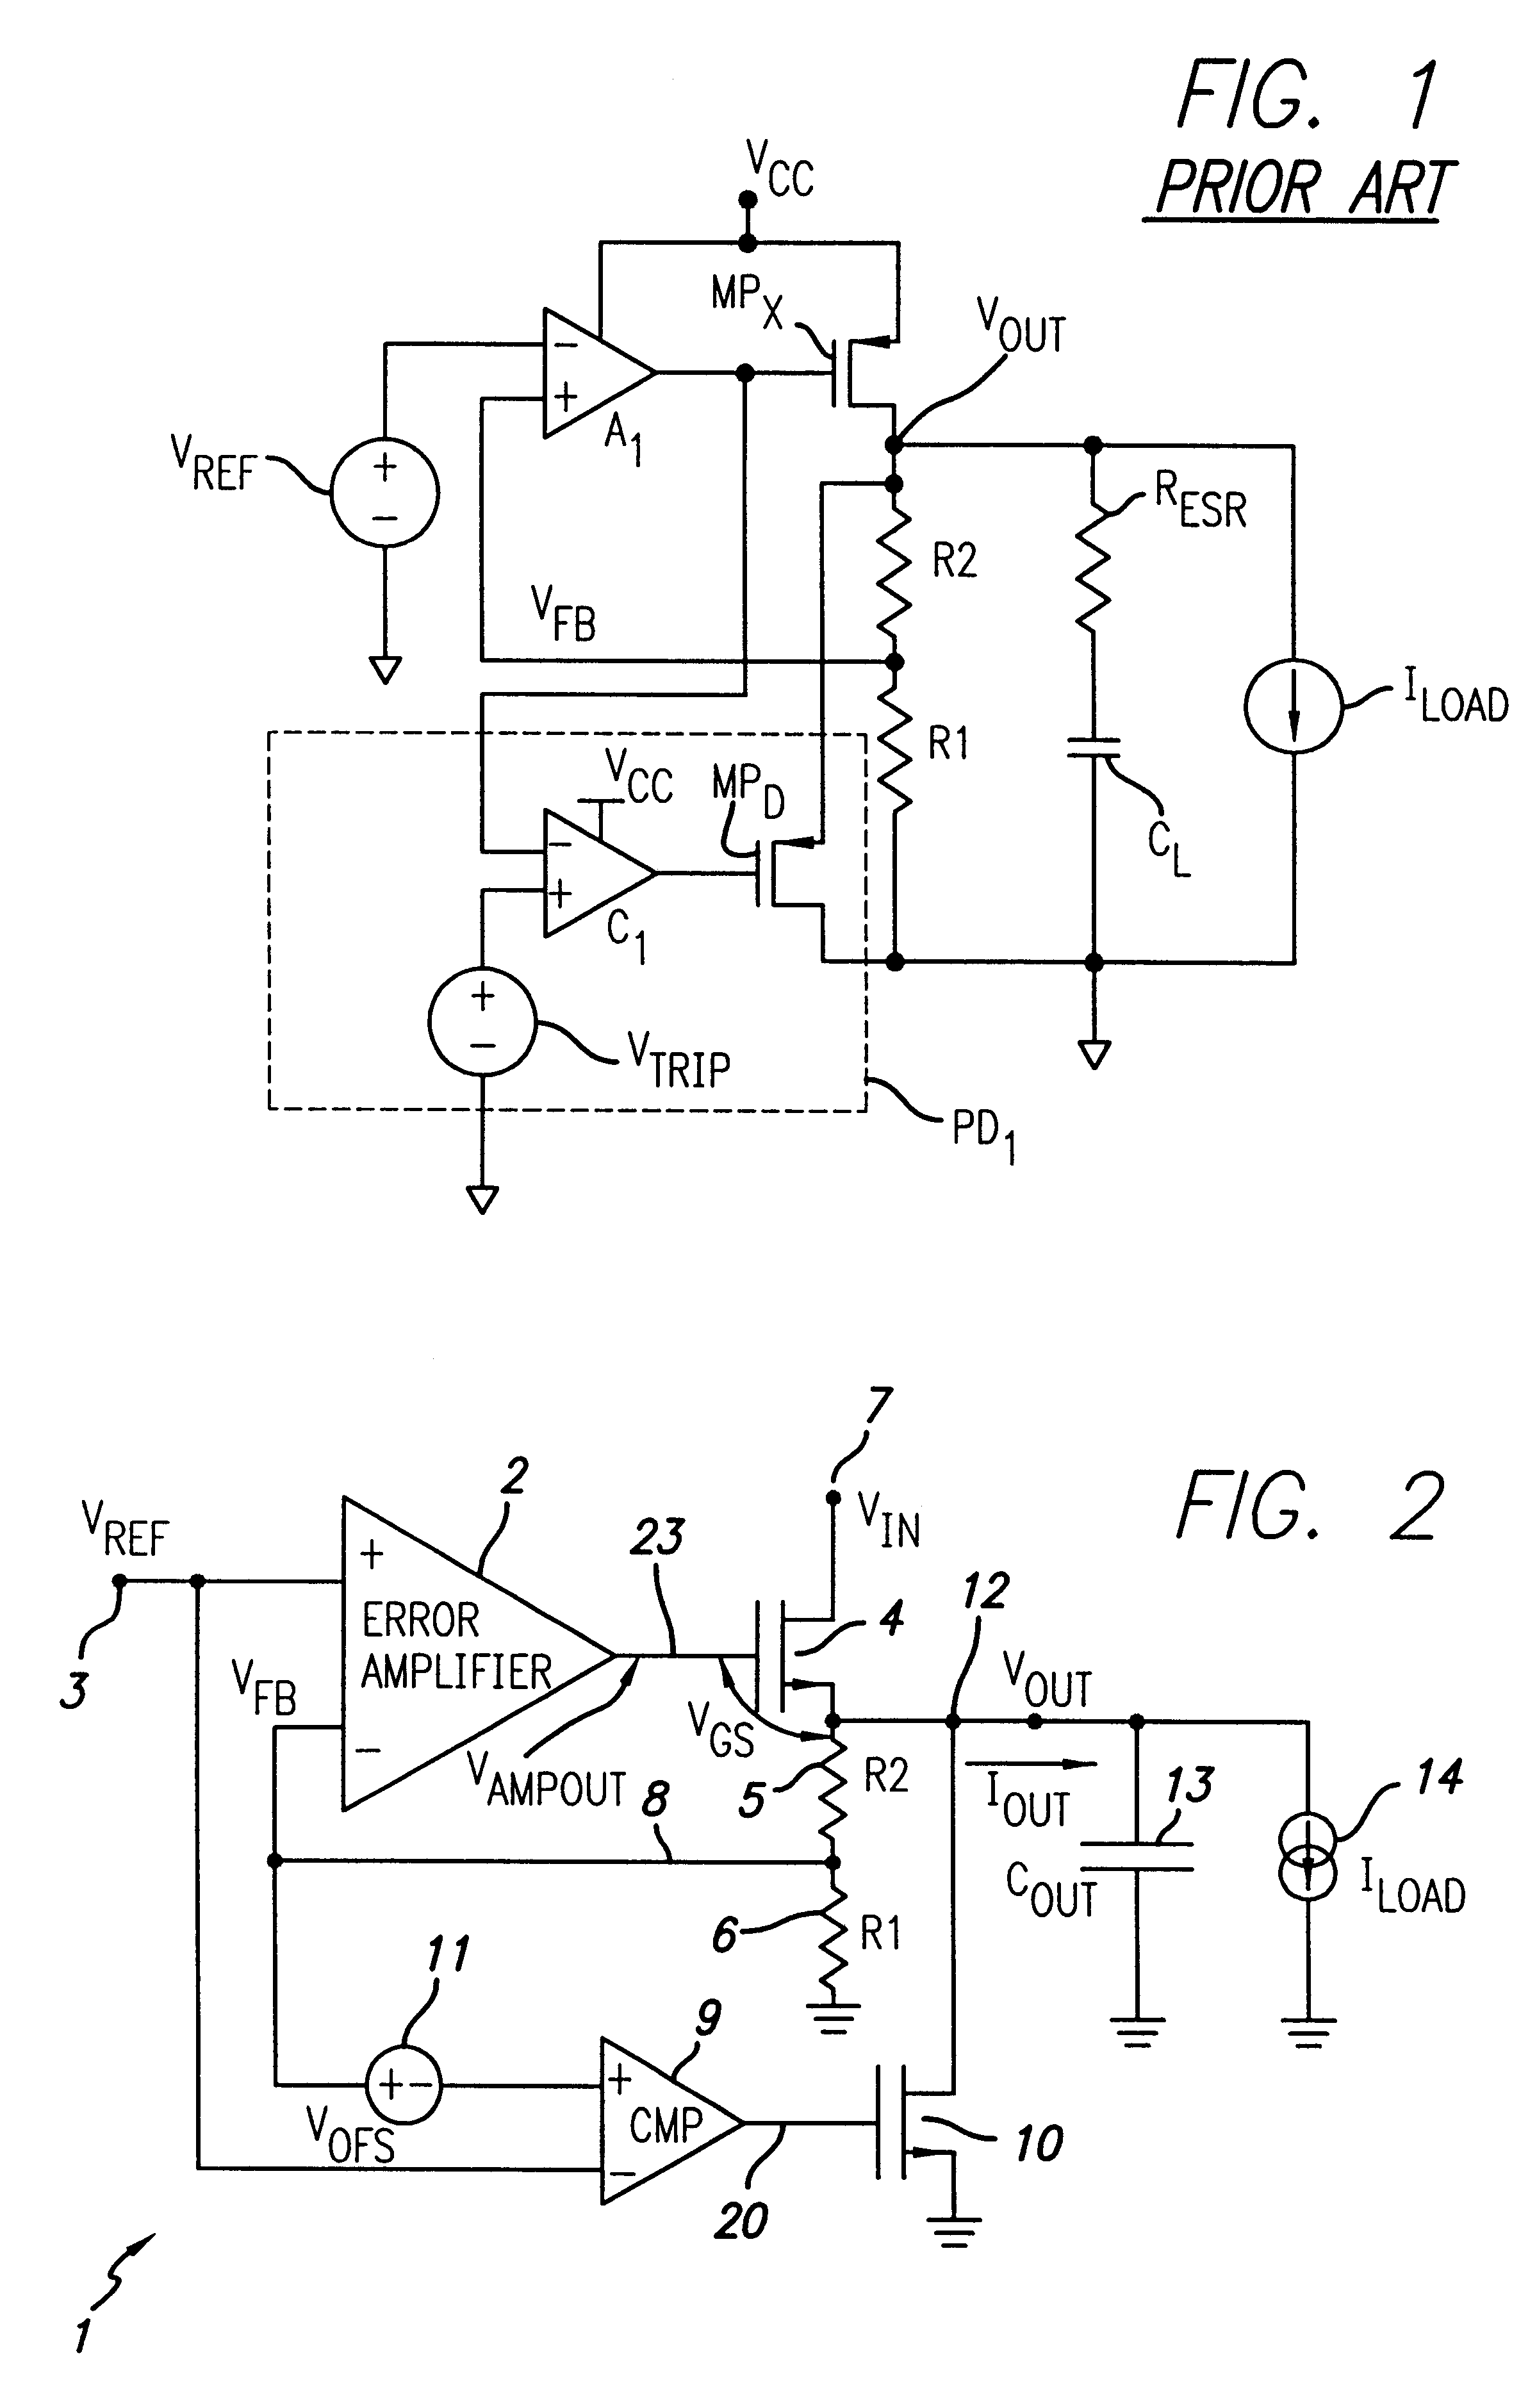 Overvoltage sensing and correction circuitry and method for low dropout voltage regulator